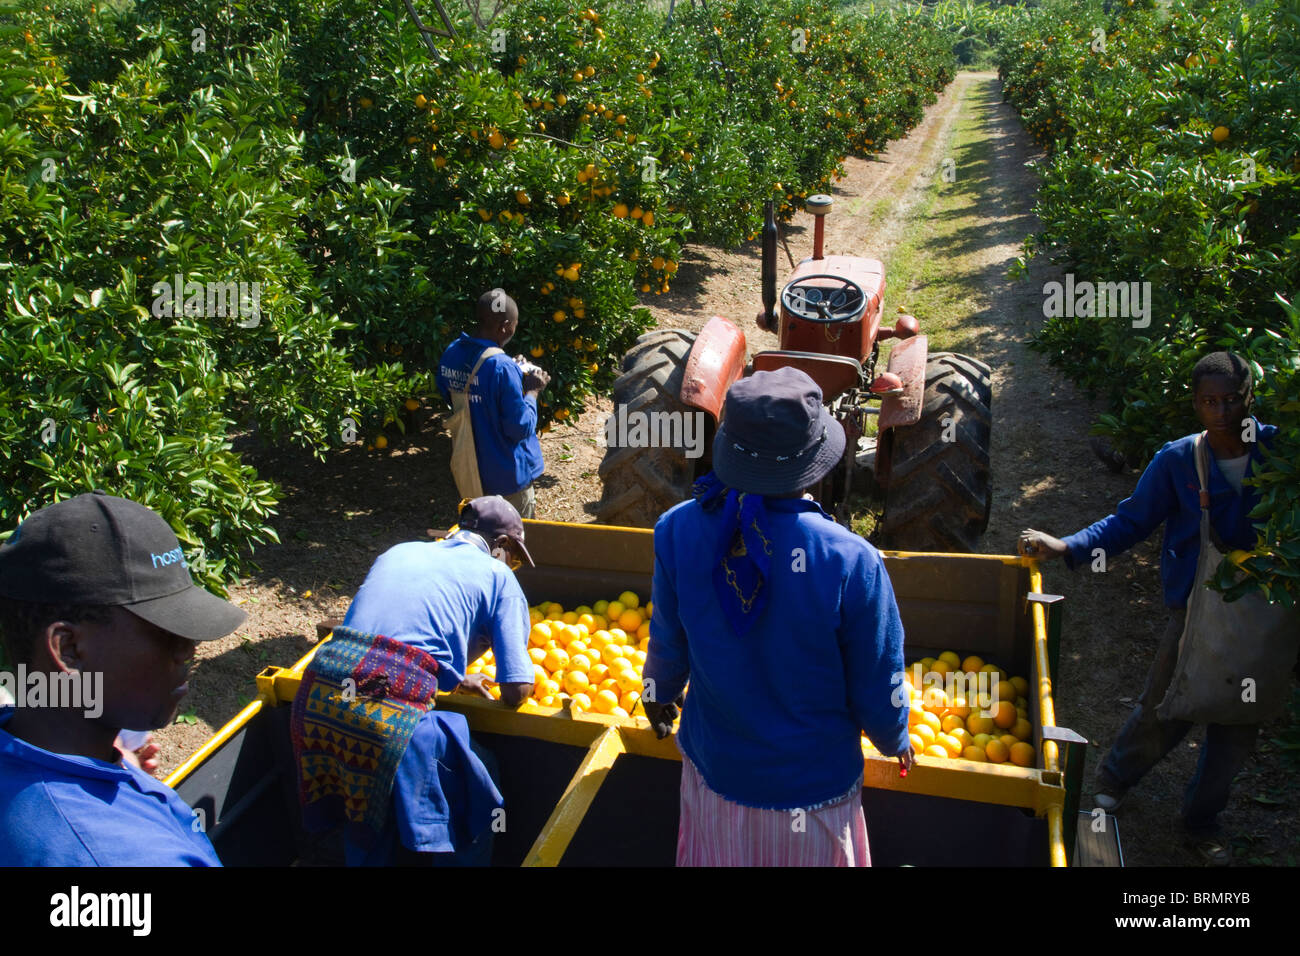 Worker emptying a bag of freshly harvested oranges into a trailer parked in an orchard Stock Photo